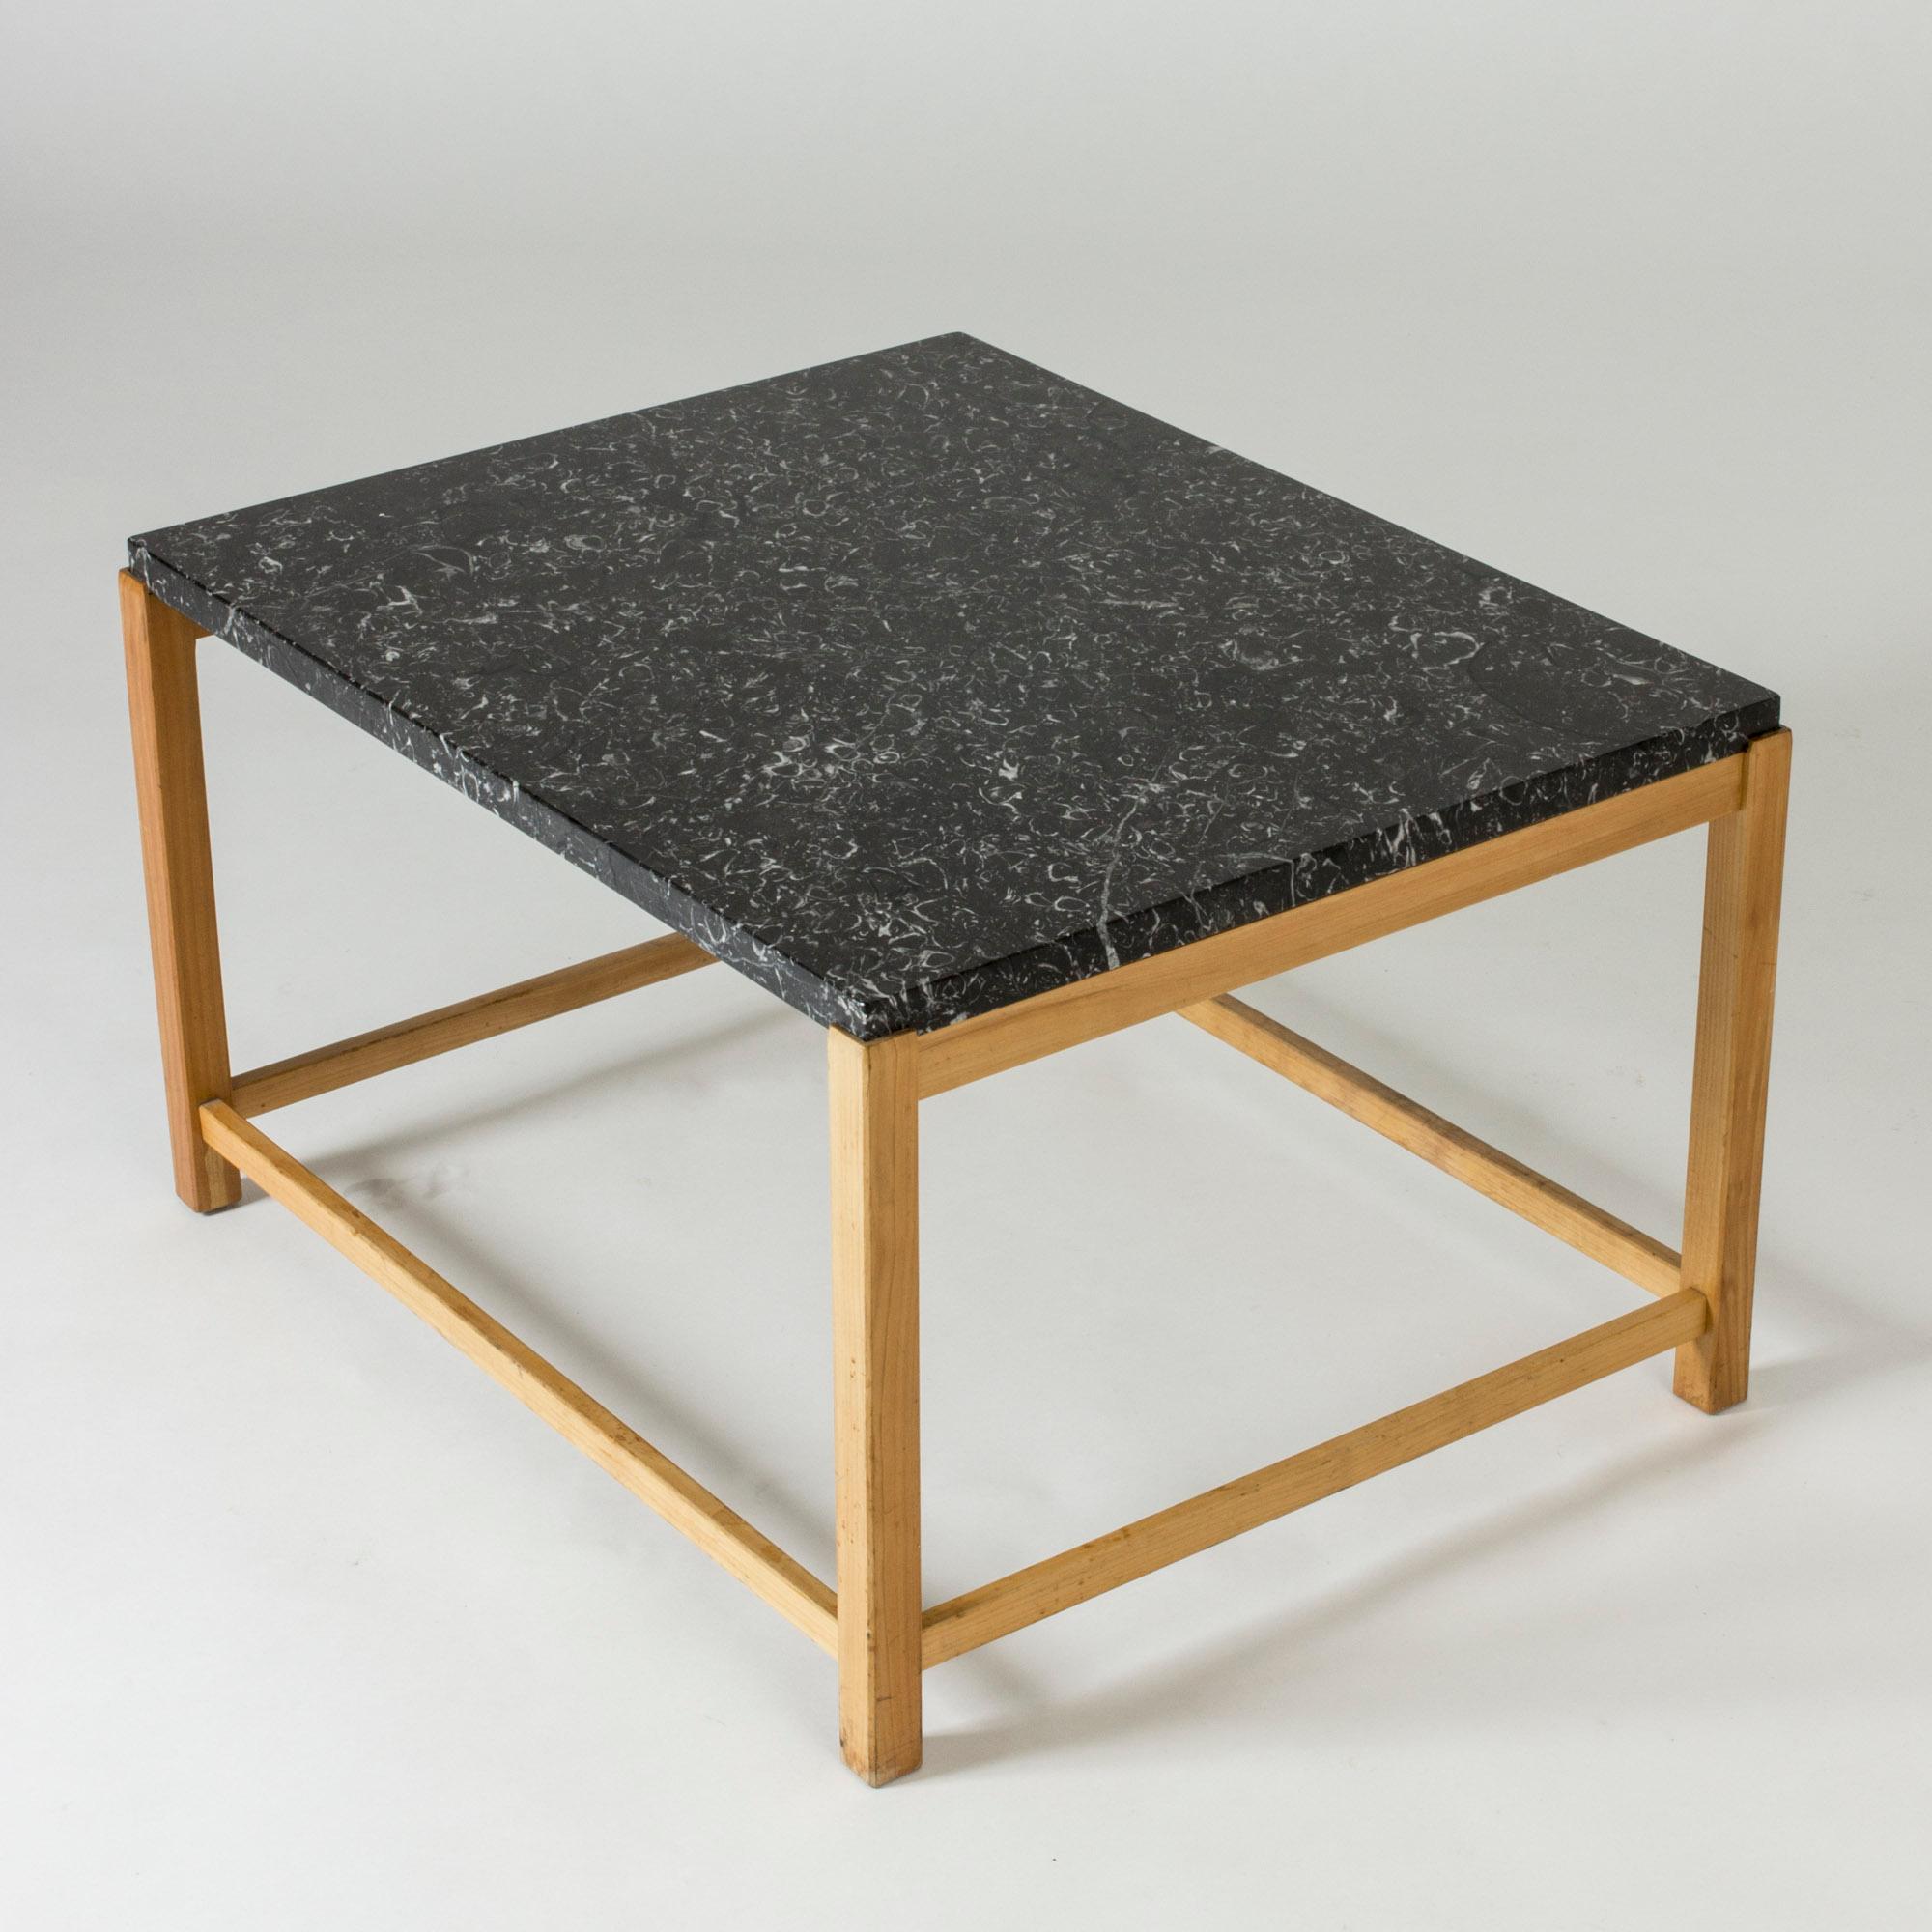 Mid-20th Century Marble-Top Coffee Table by Carl-Axel Acking for Torsten Schollin, Sweden, 1950s For Sale